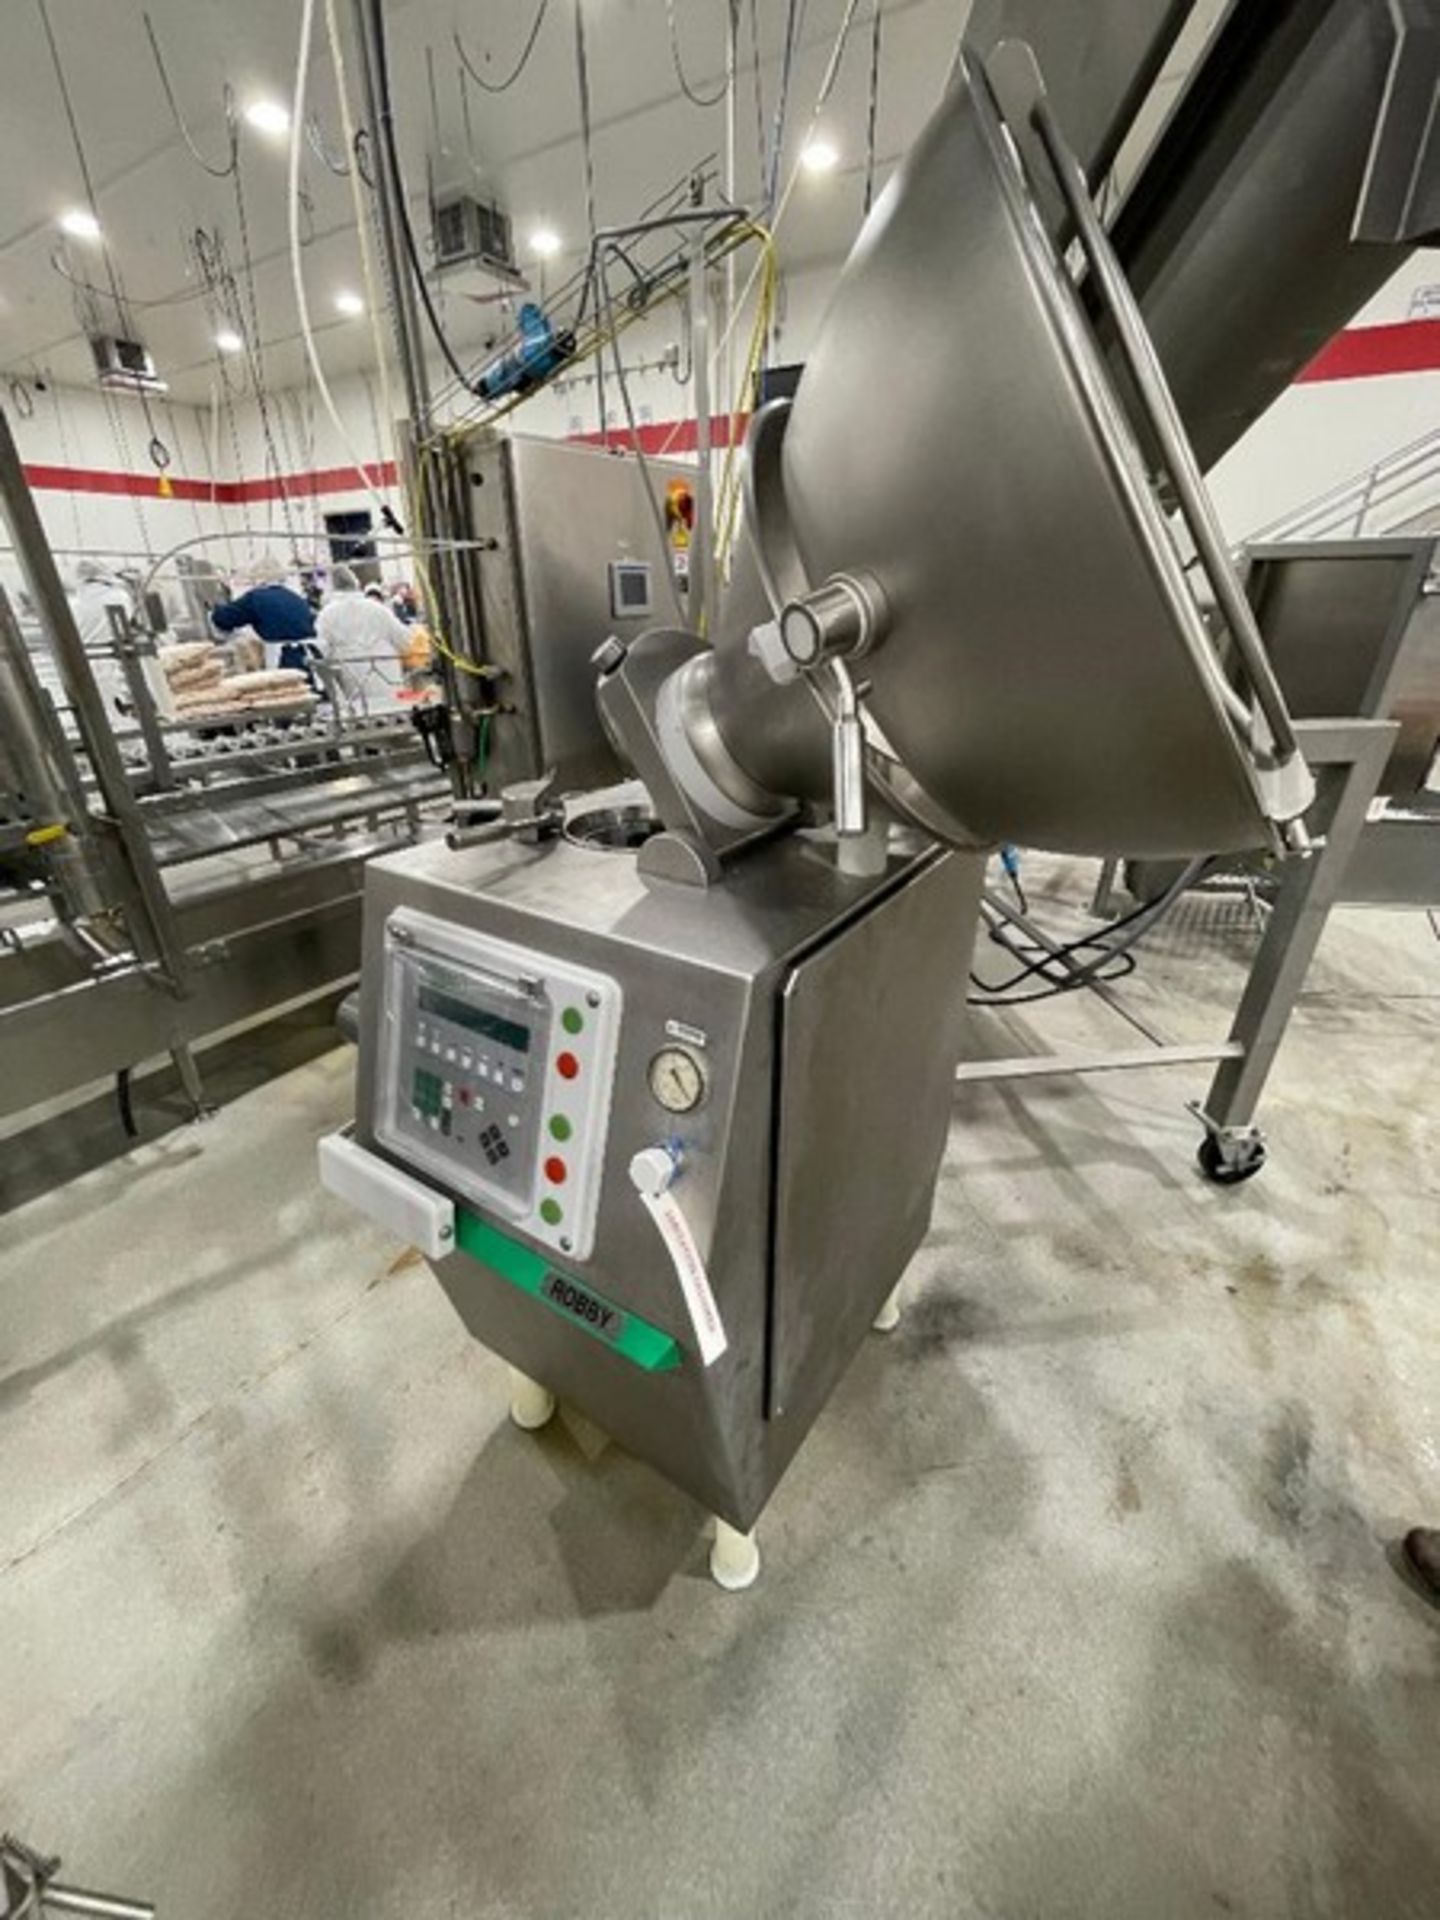 Vemag Robby All S/S Sanitary System, Mfg. 2012 with Touchpad Digital Controls, Numerous New Spare - Image 5 of 9